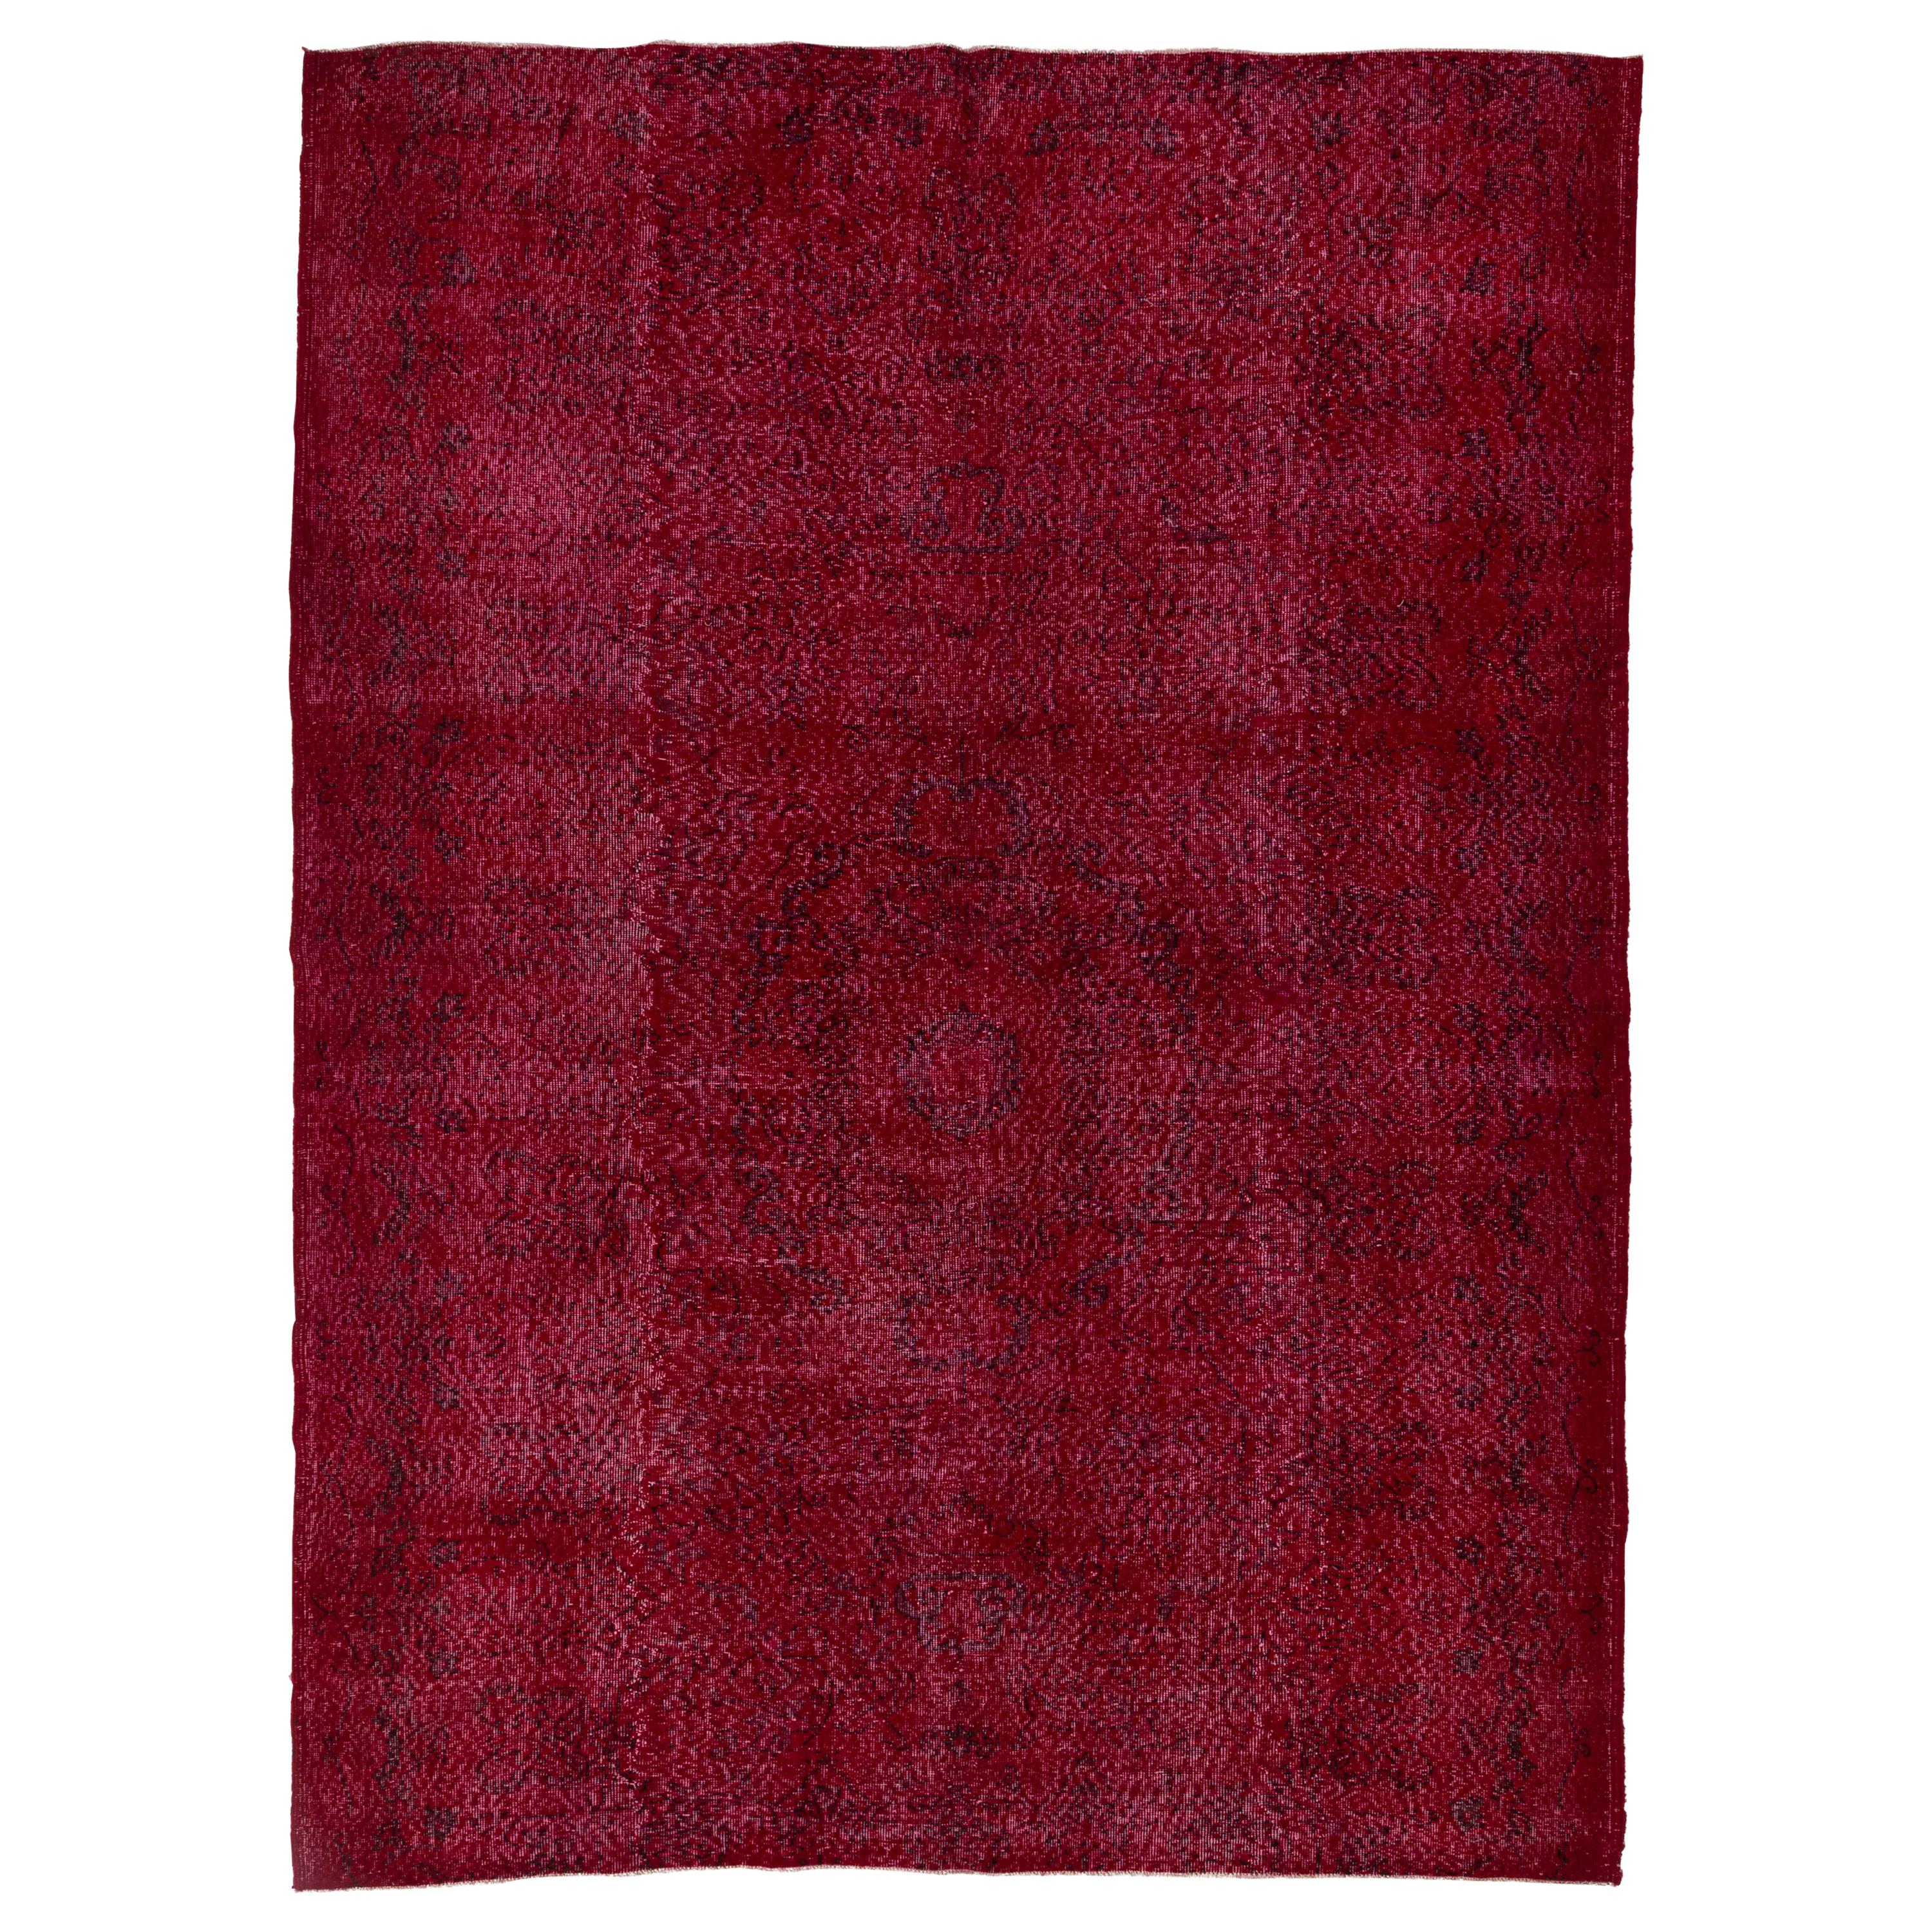 7.4x10 ft Vintage Handmade Wool Turkish Area Rug in Red, Contemporary Carpet For Sale